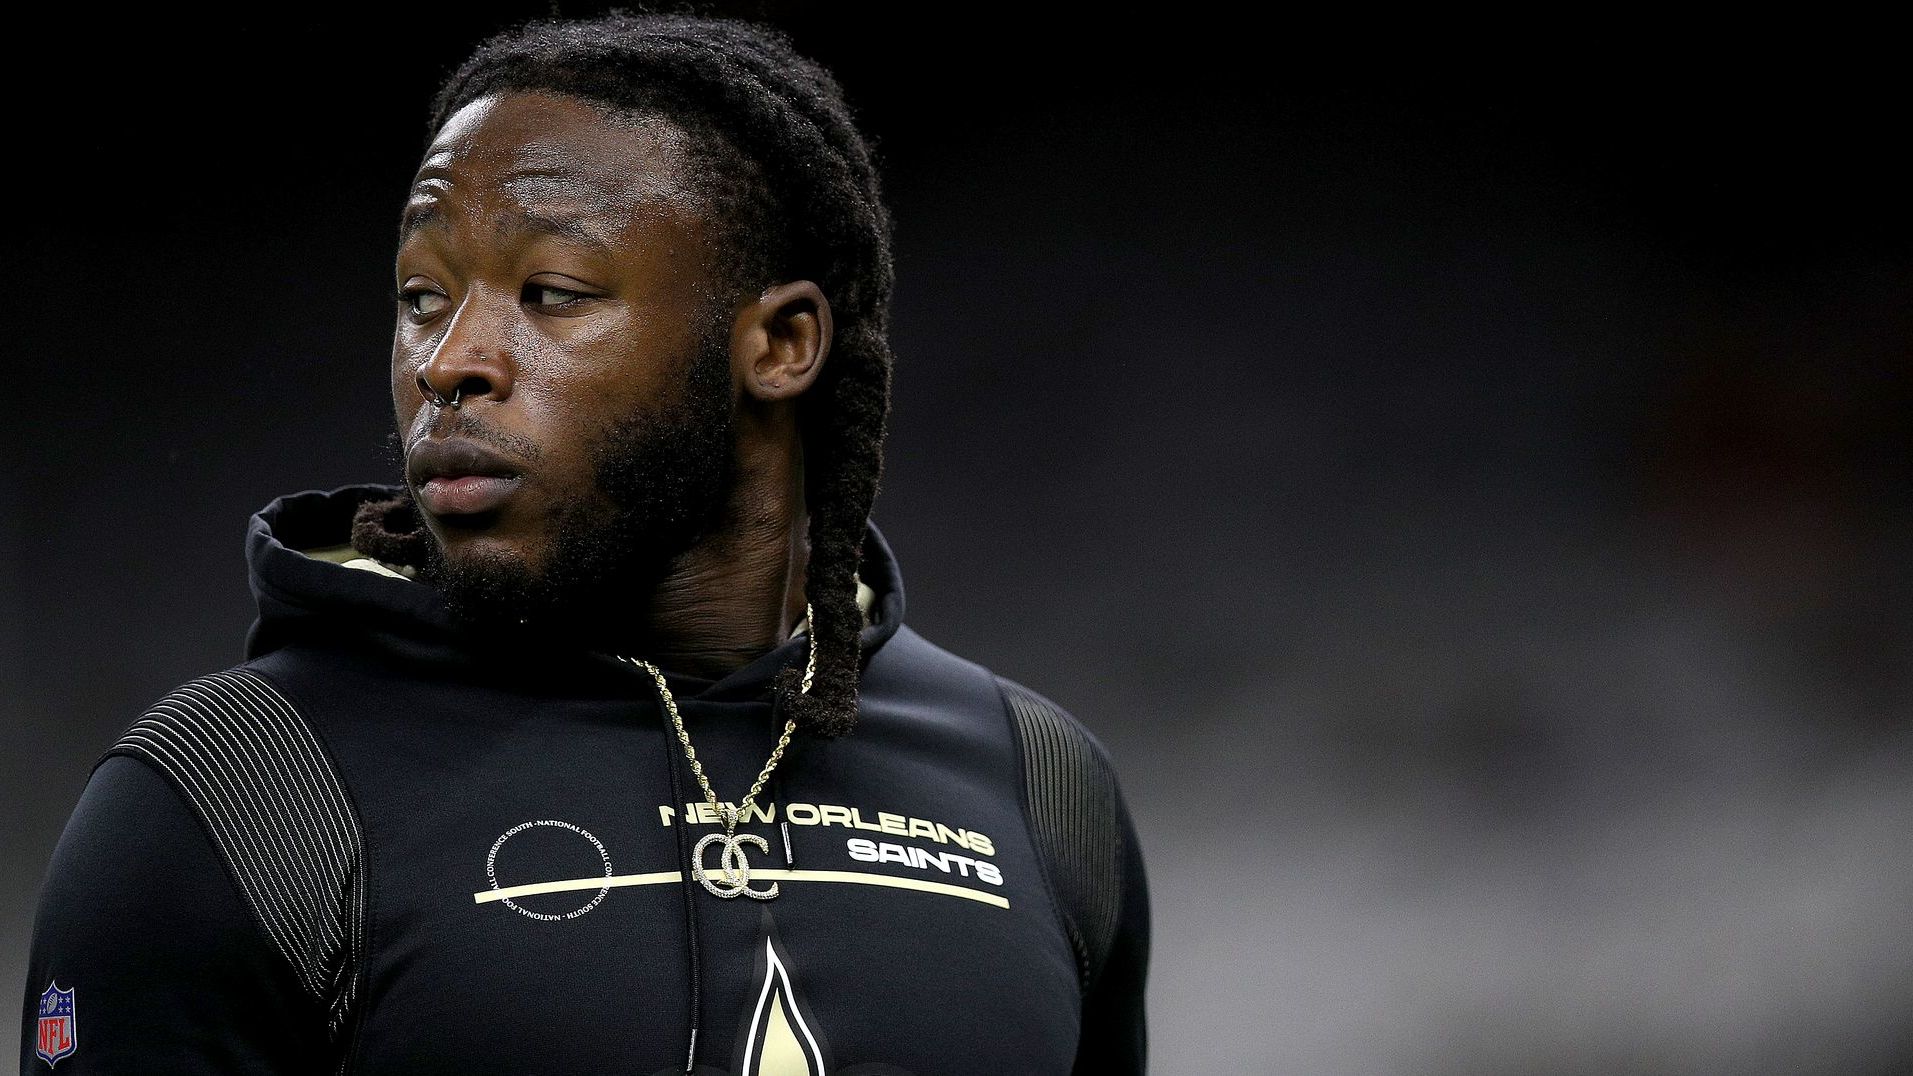 Alvin Kamara warms up prior to the start of a NFL game